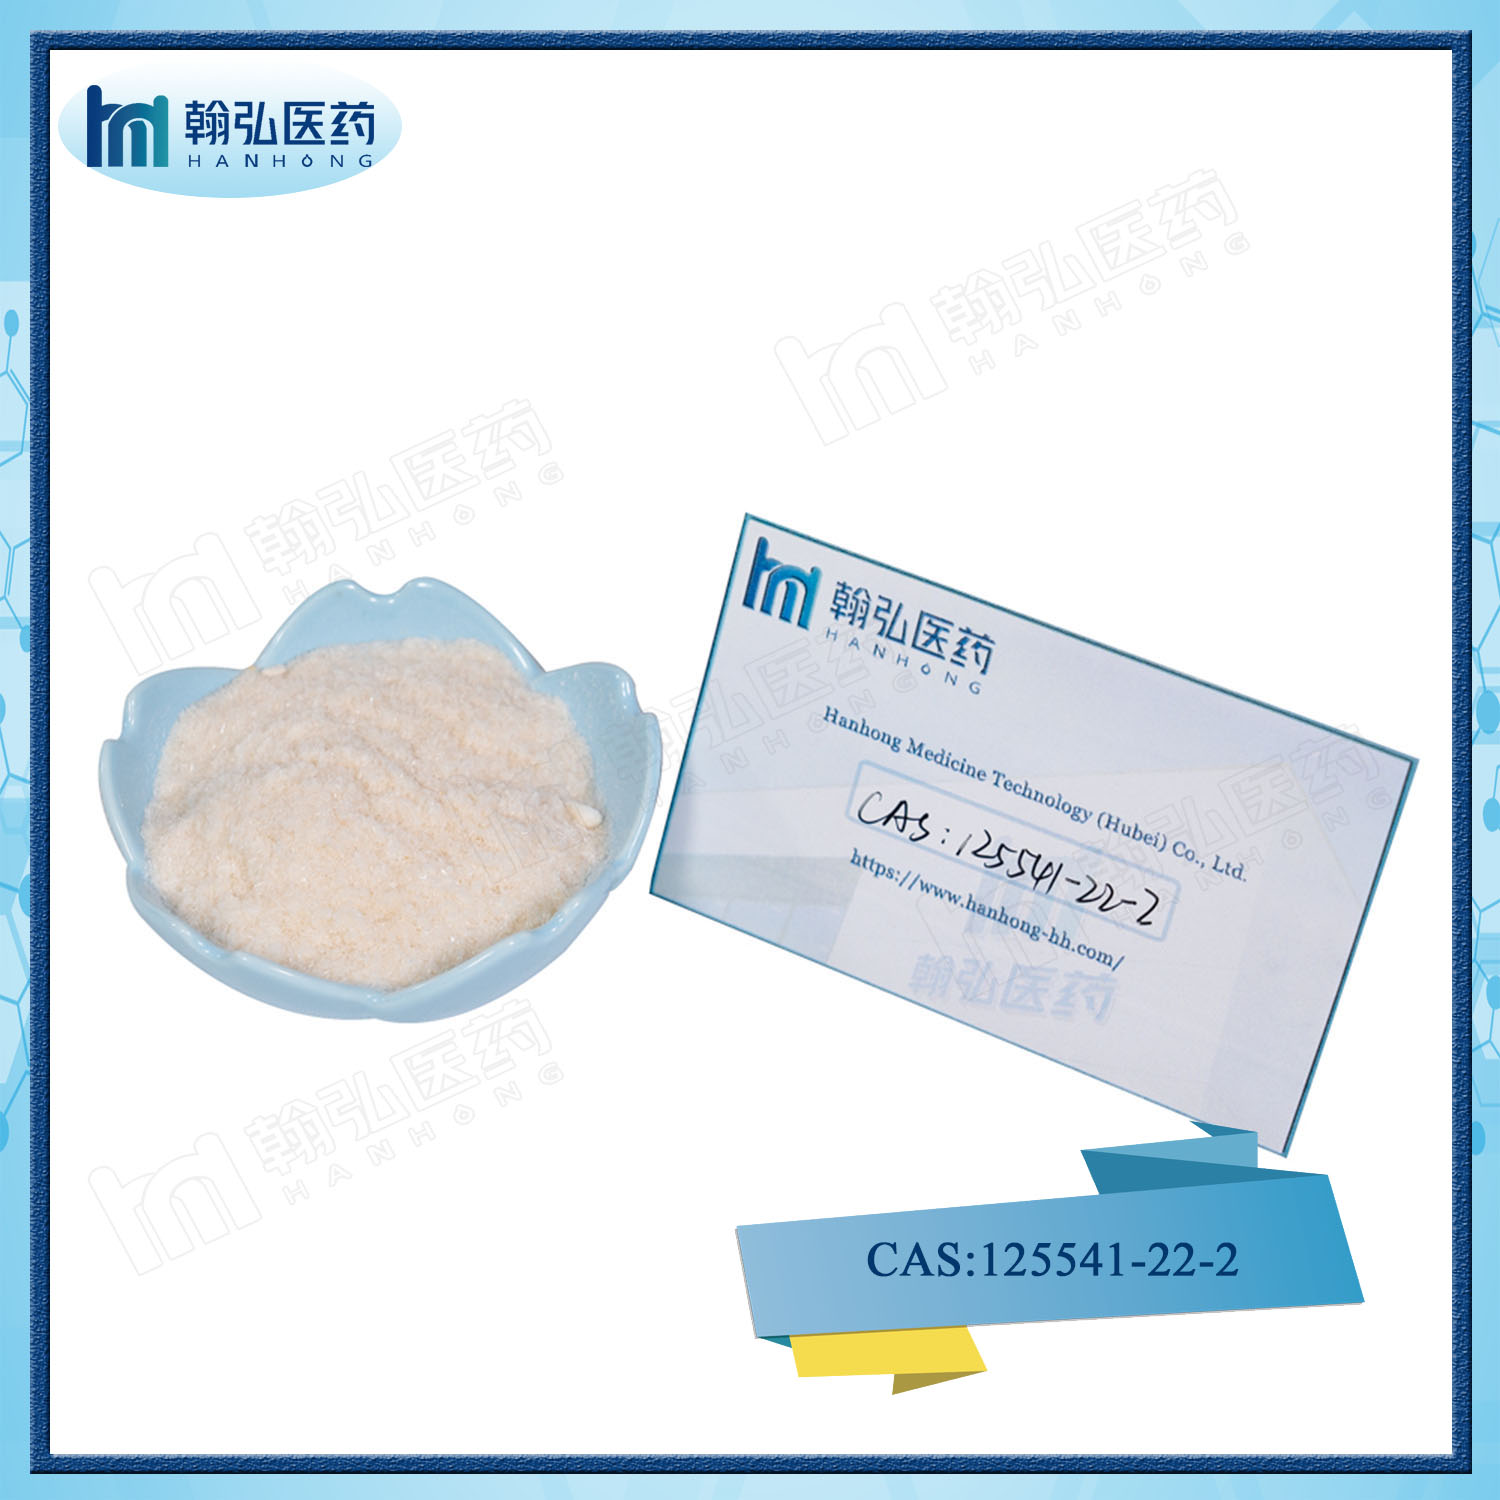 Factory Price Tert-Butyl 4-Anilinopiperidine-1-Carboxylate Pyridinecarboxylate CAS No.1255541-22-2 /19099-93-5 /79099-07-3/288573-56-8/1451-82-7 Whatsapp/Wechat: +8615927457486 WickrMe: Ccassie